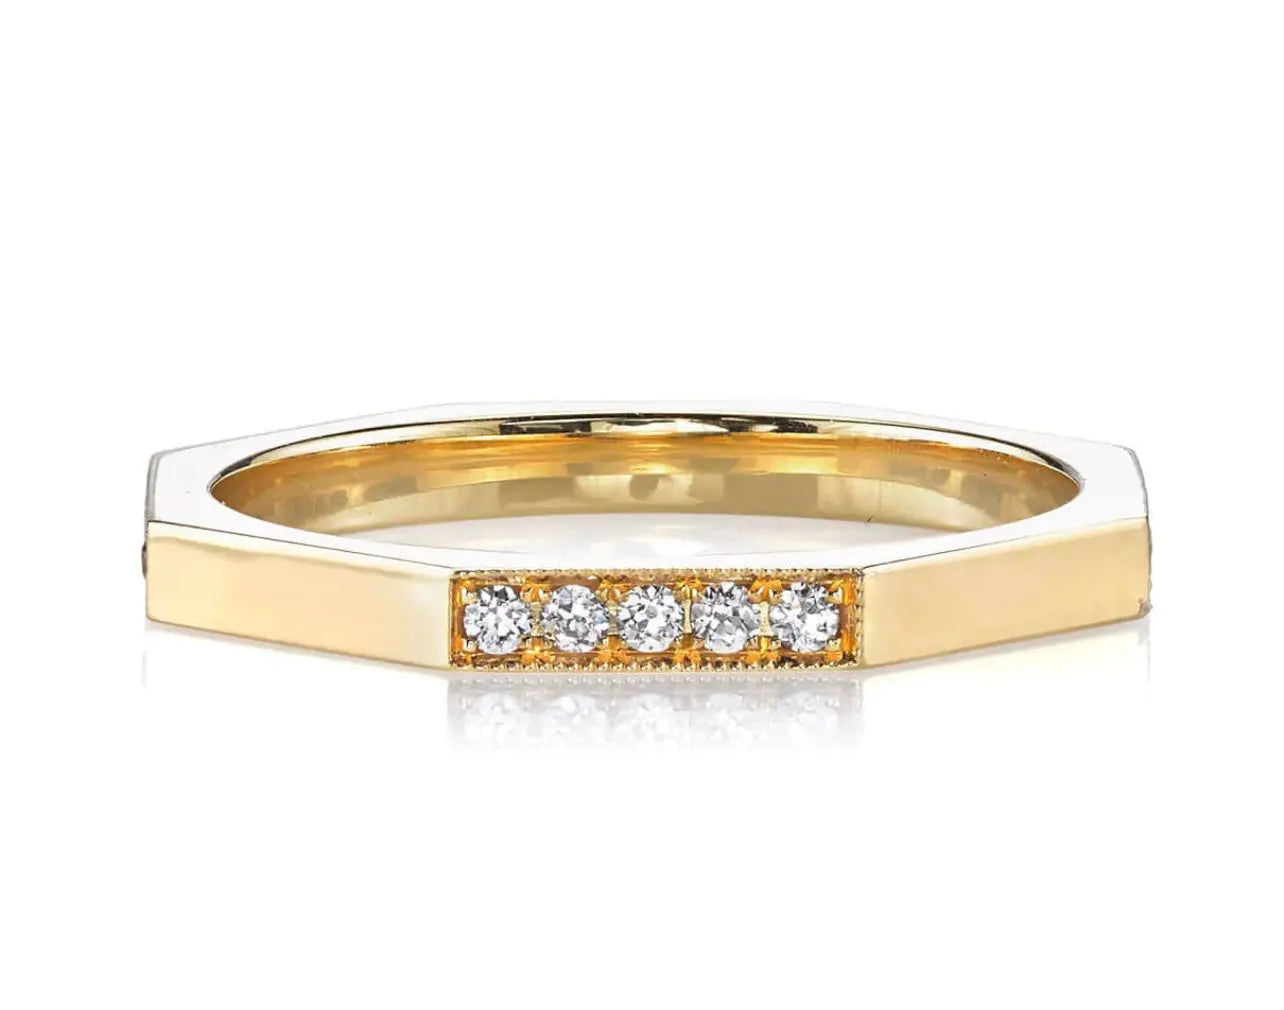 18k yellow gold with appromixetely 0.20ctw old European cut diamonds set in a handcrafted sectional octagonal band.   Designed by Single Stone and handmade in LA